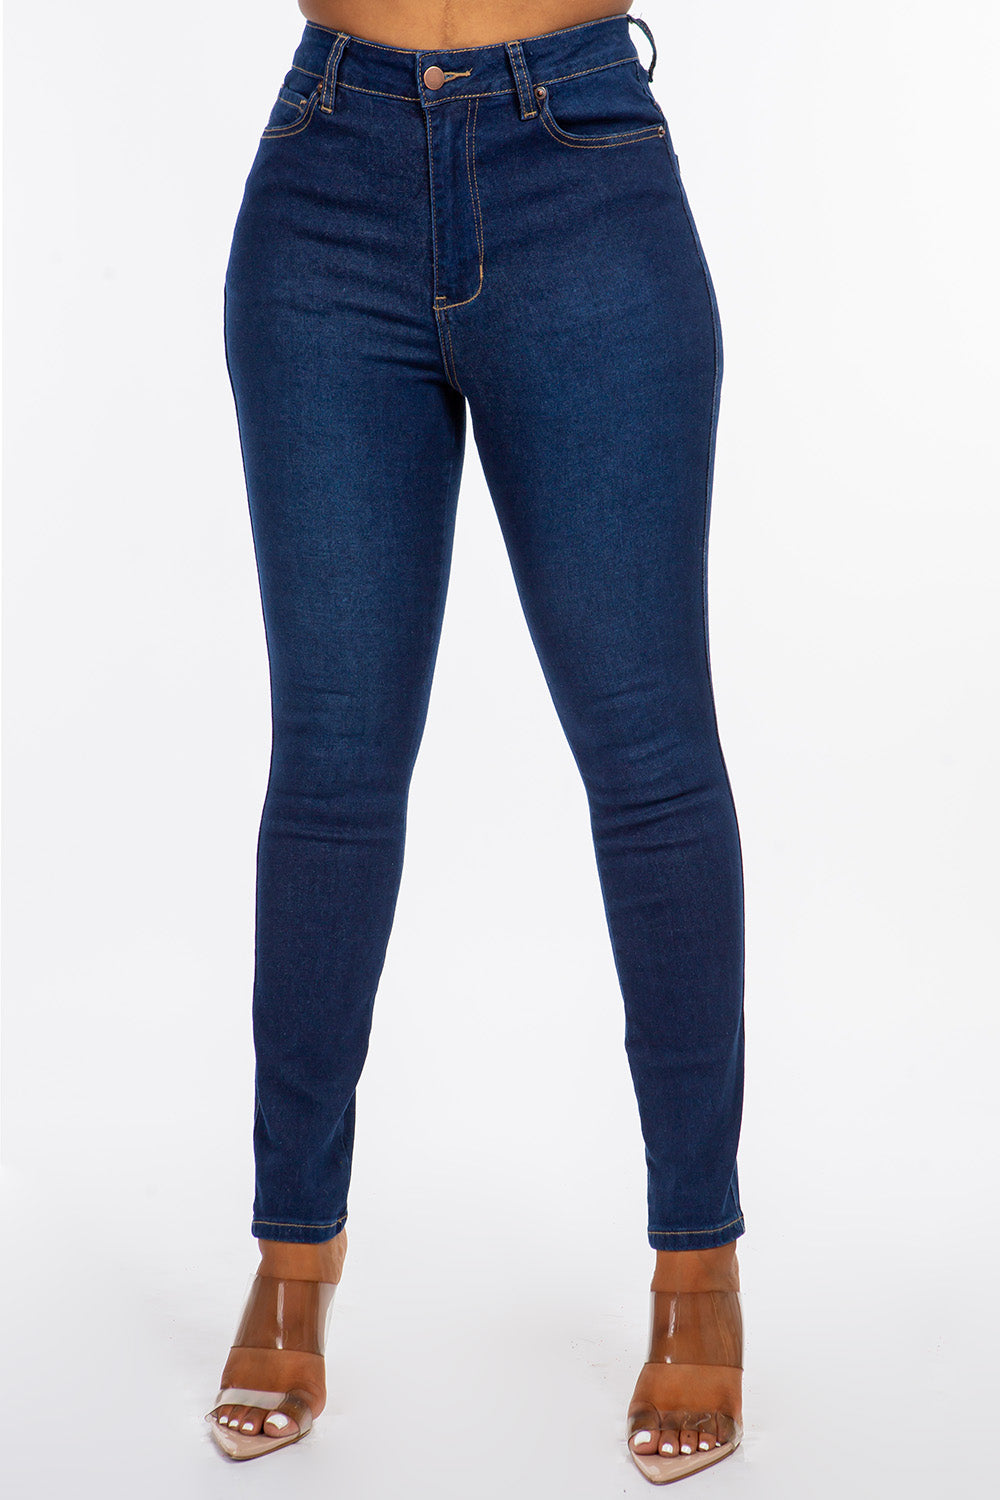 Wholesale NEW Classic High Skinny Jean Blue Jeans – BLUE